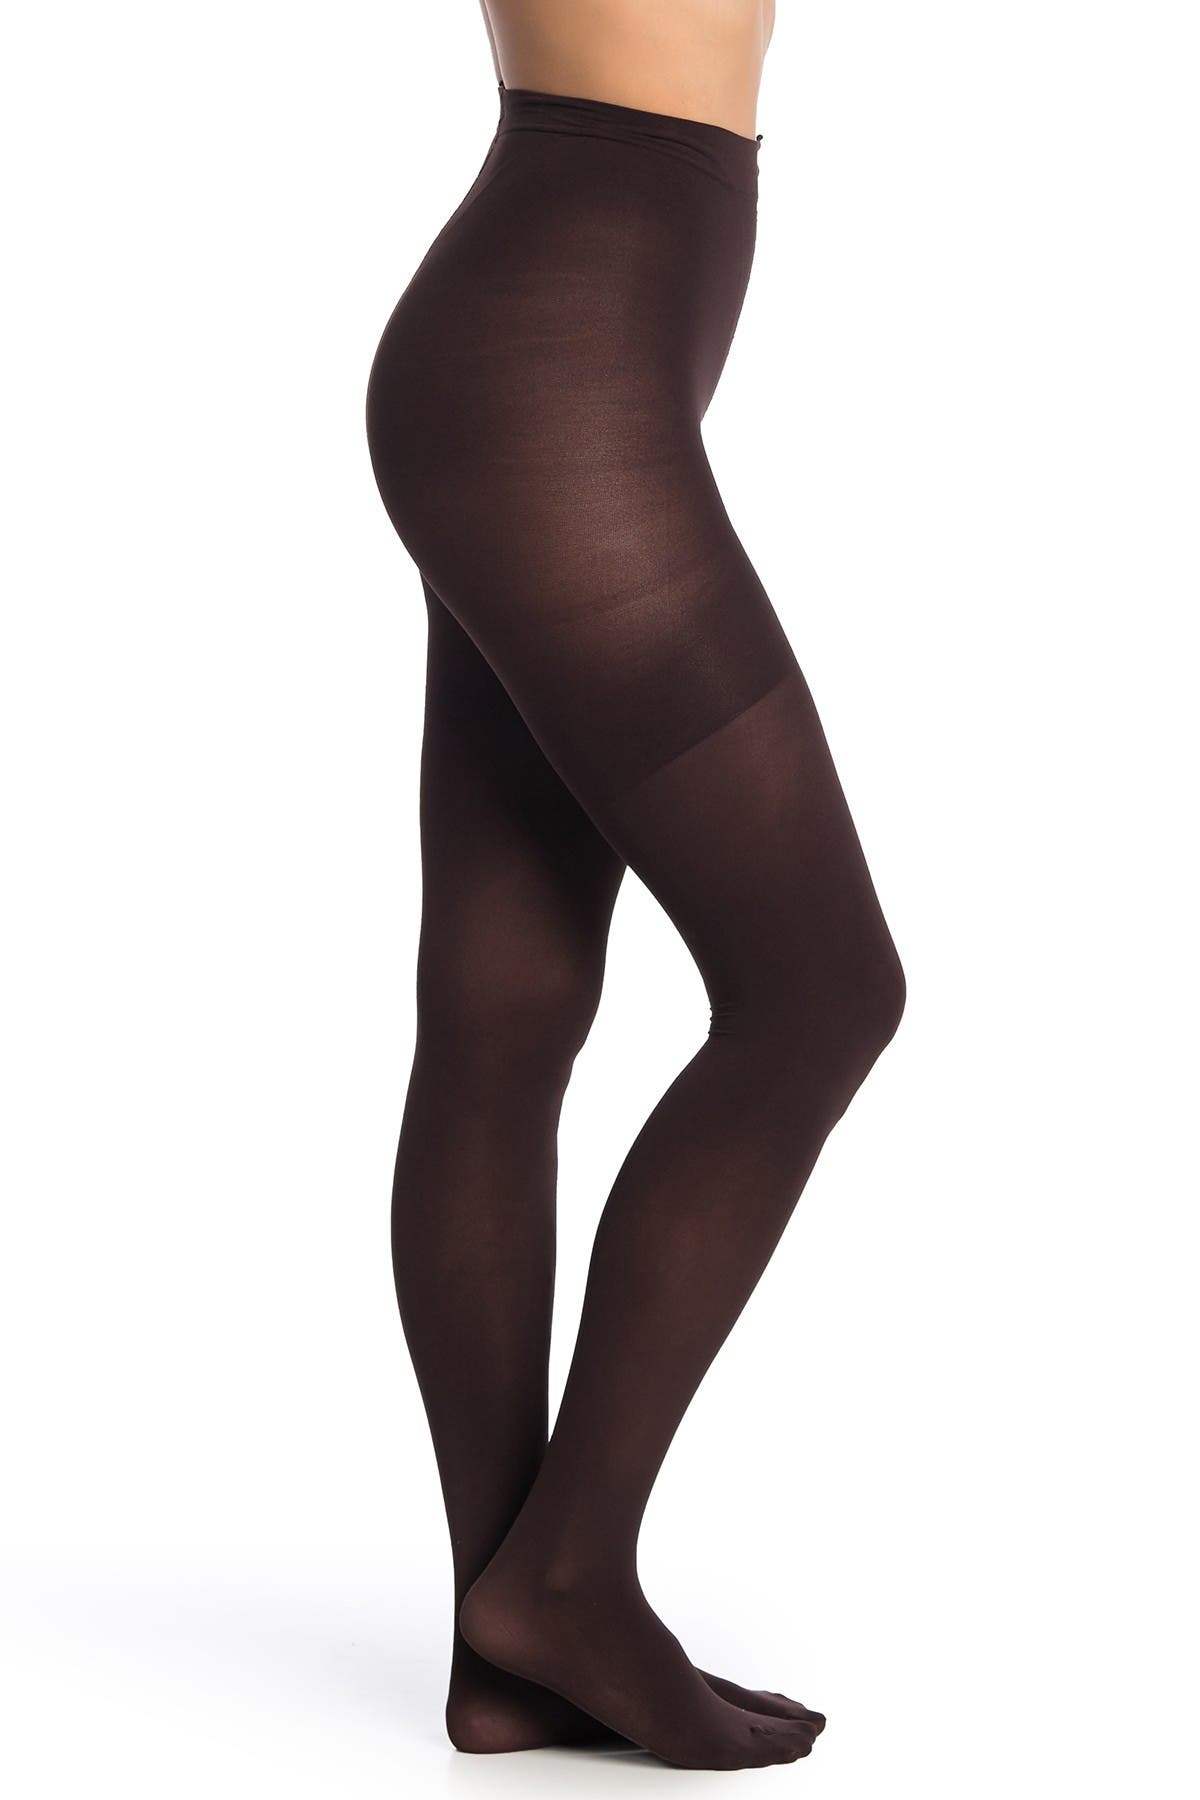 SPANX LUXE LEG TIGHTS,843953219798